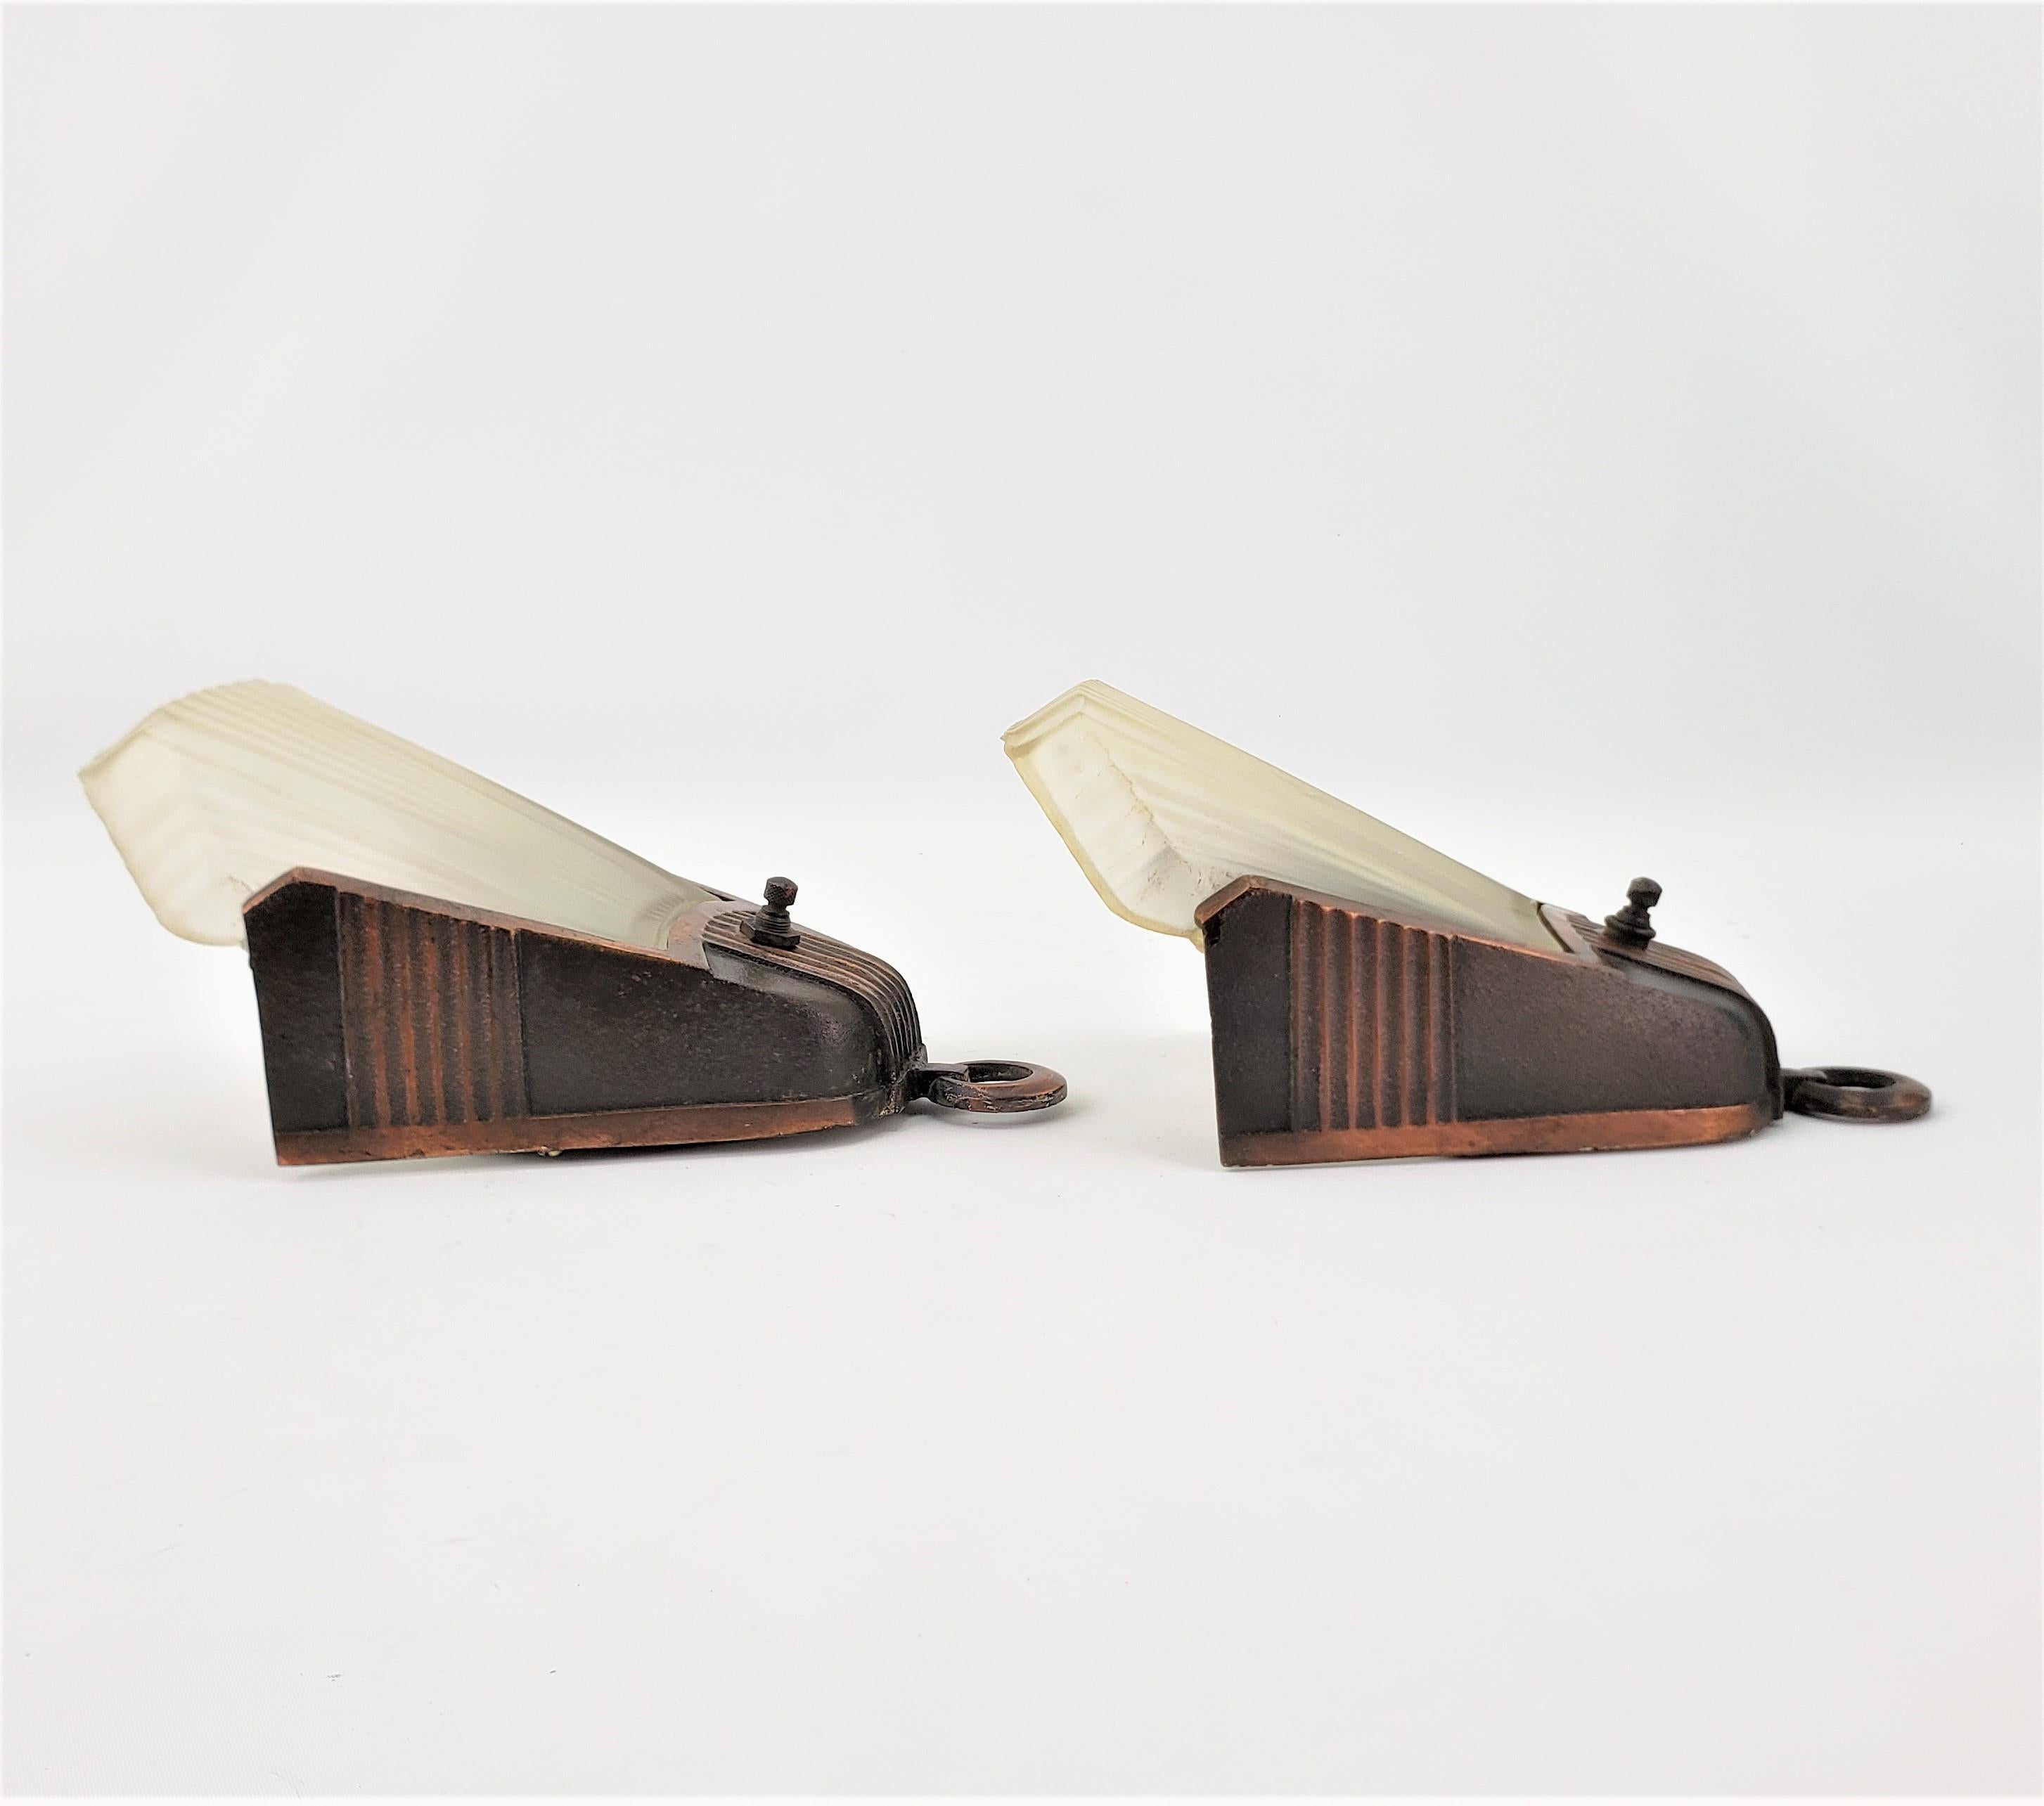 This pair of Art Deco frosted glass slip shade wall sconces are unsigned, but presumed to have been made in the United States in approximately 1920 in the period Deco style. The wall brackets are made of metal with a brass or bronze patination, and